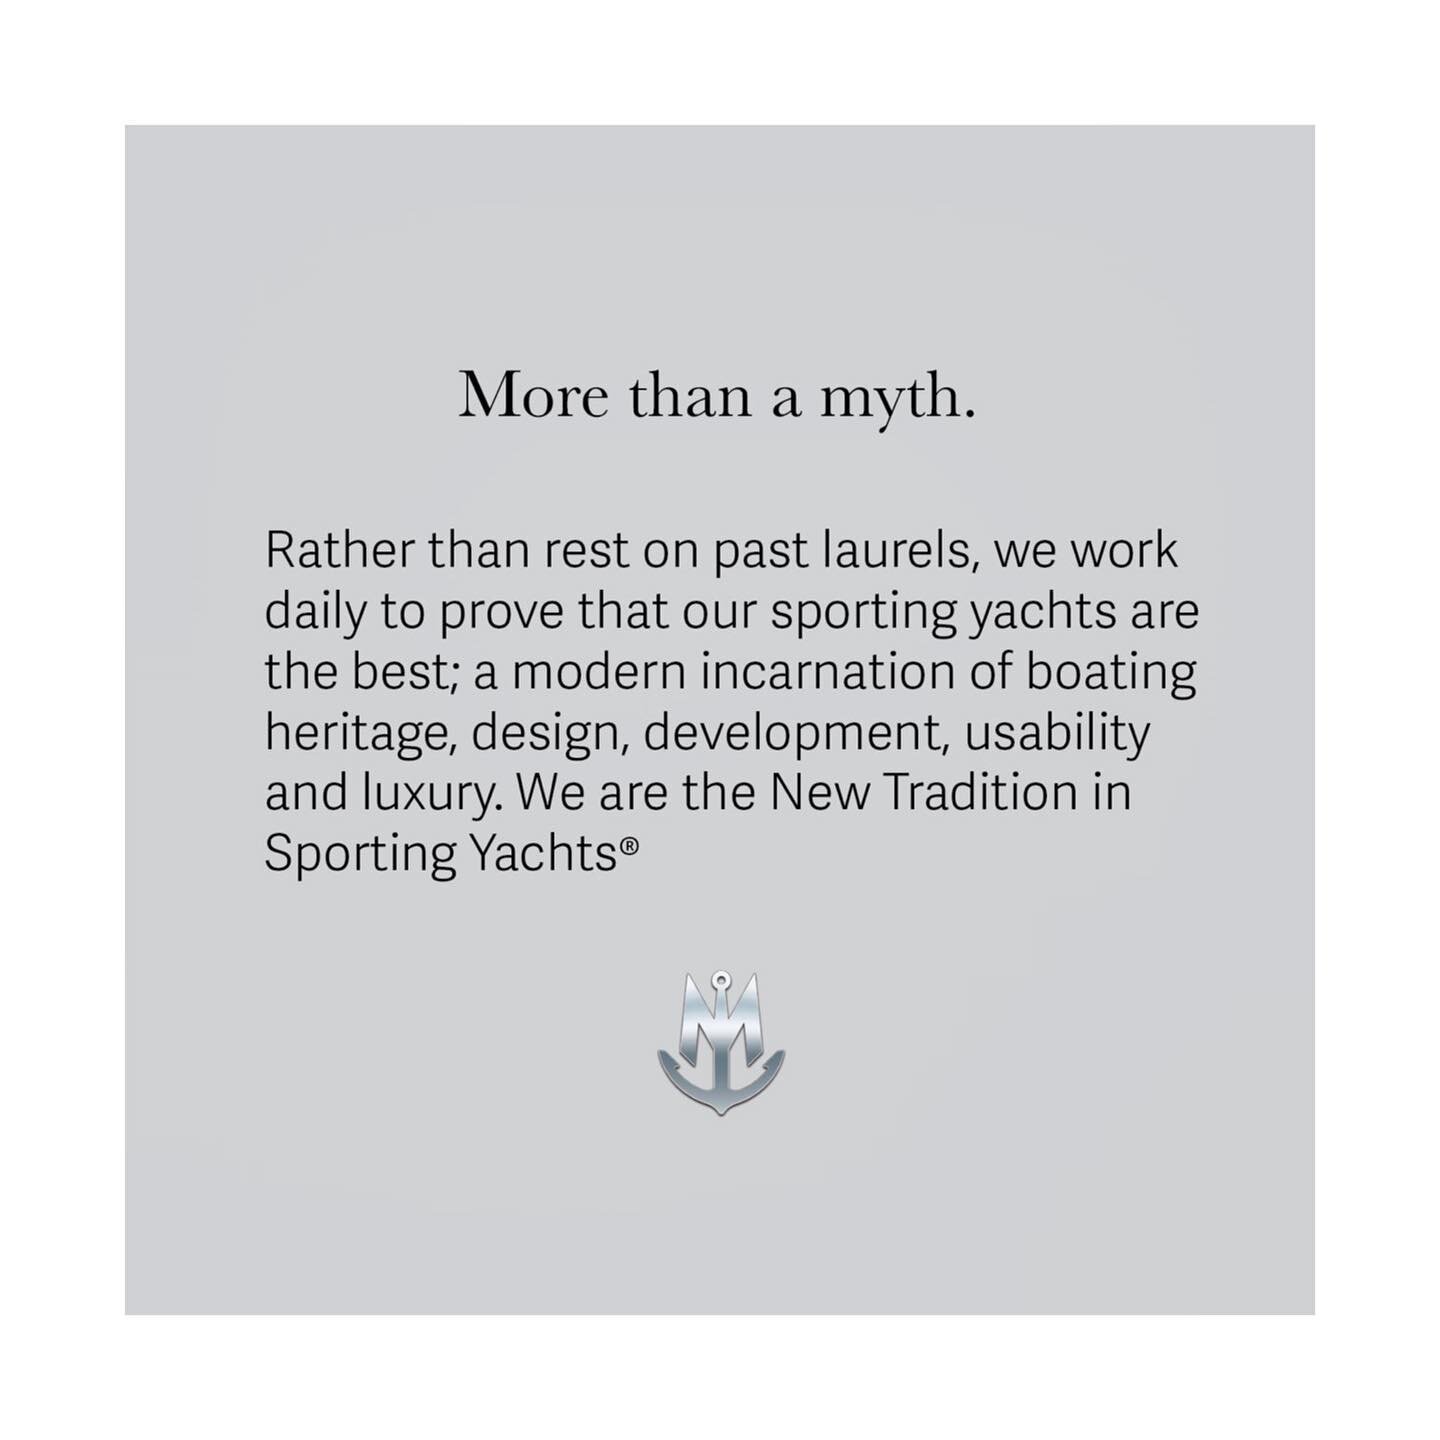 More Than A Myth.
Rather than rest on past laurels, we work daily to prove that our sporting yachts are the best; a modern incarnation of boating heritage, design, development, usability and luxury. We are the New Tradition in Sporting Yachts&reg;
*
